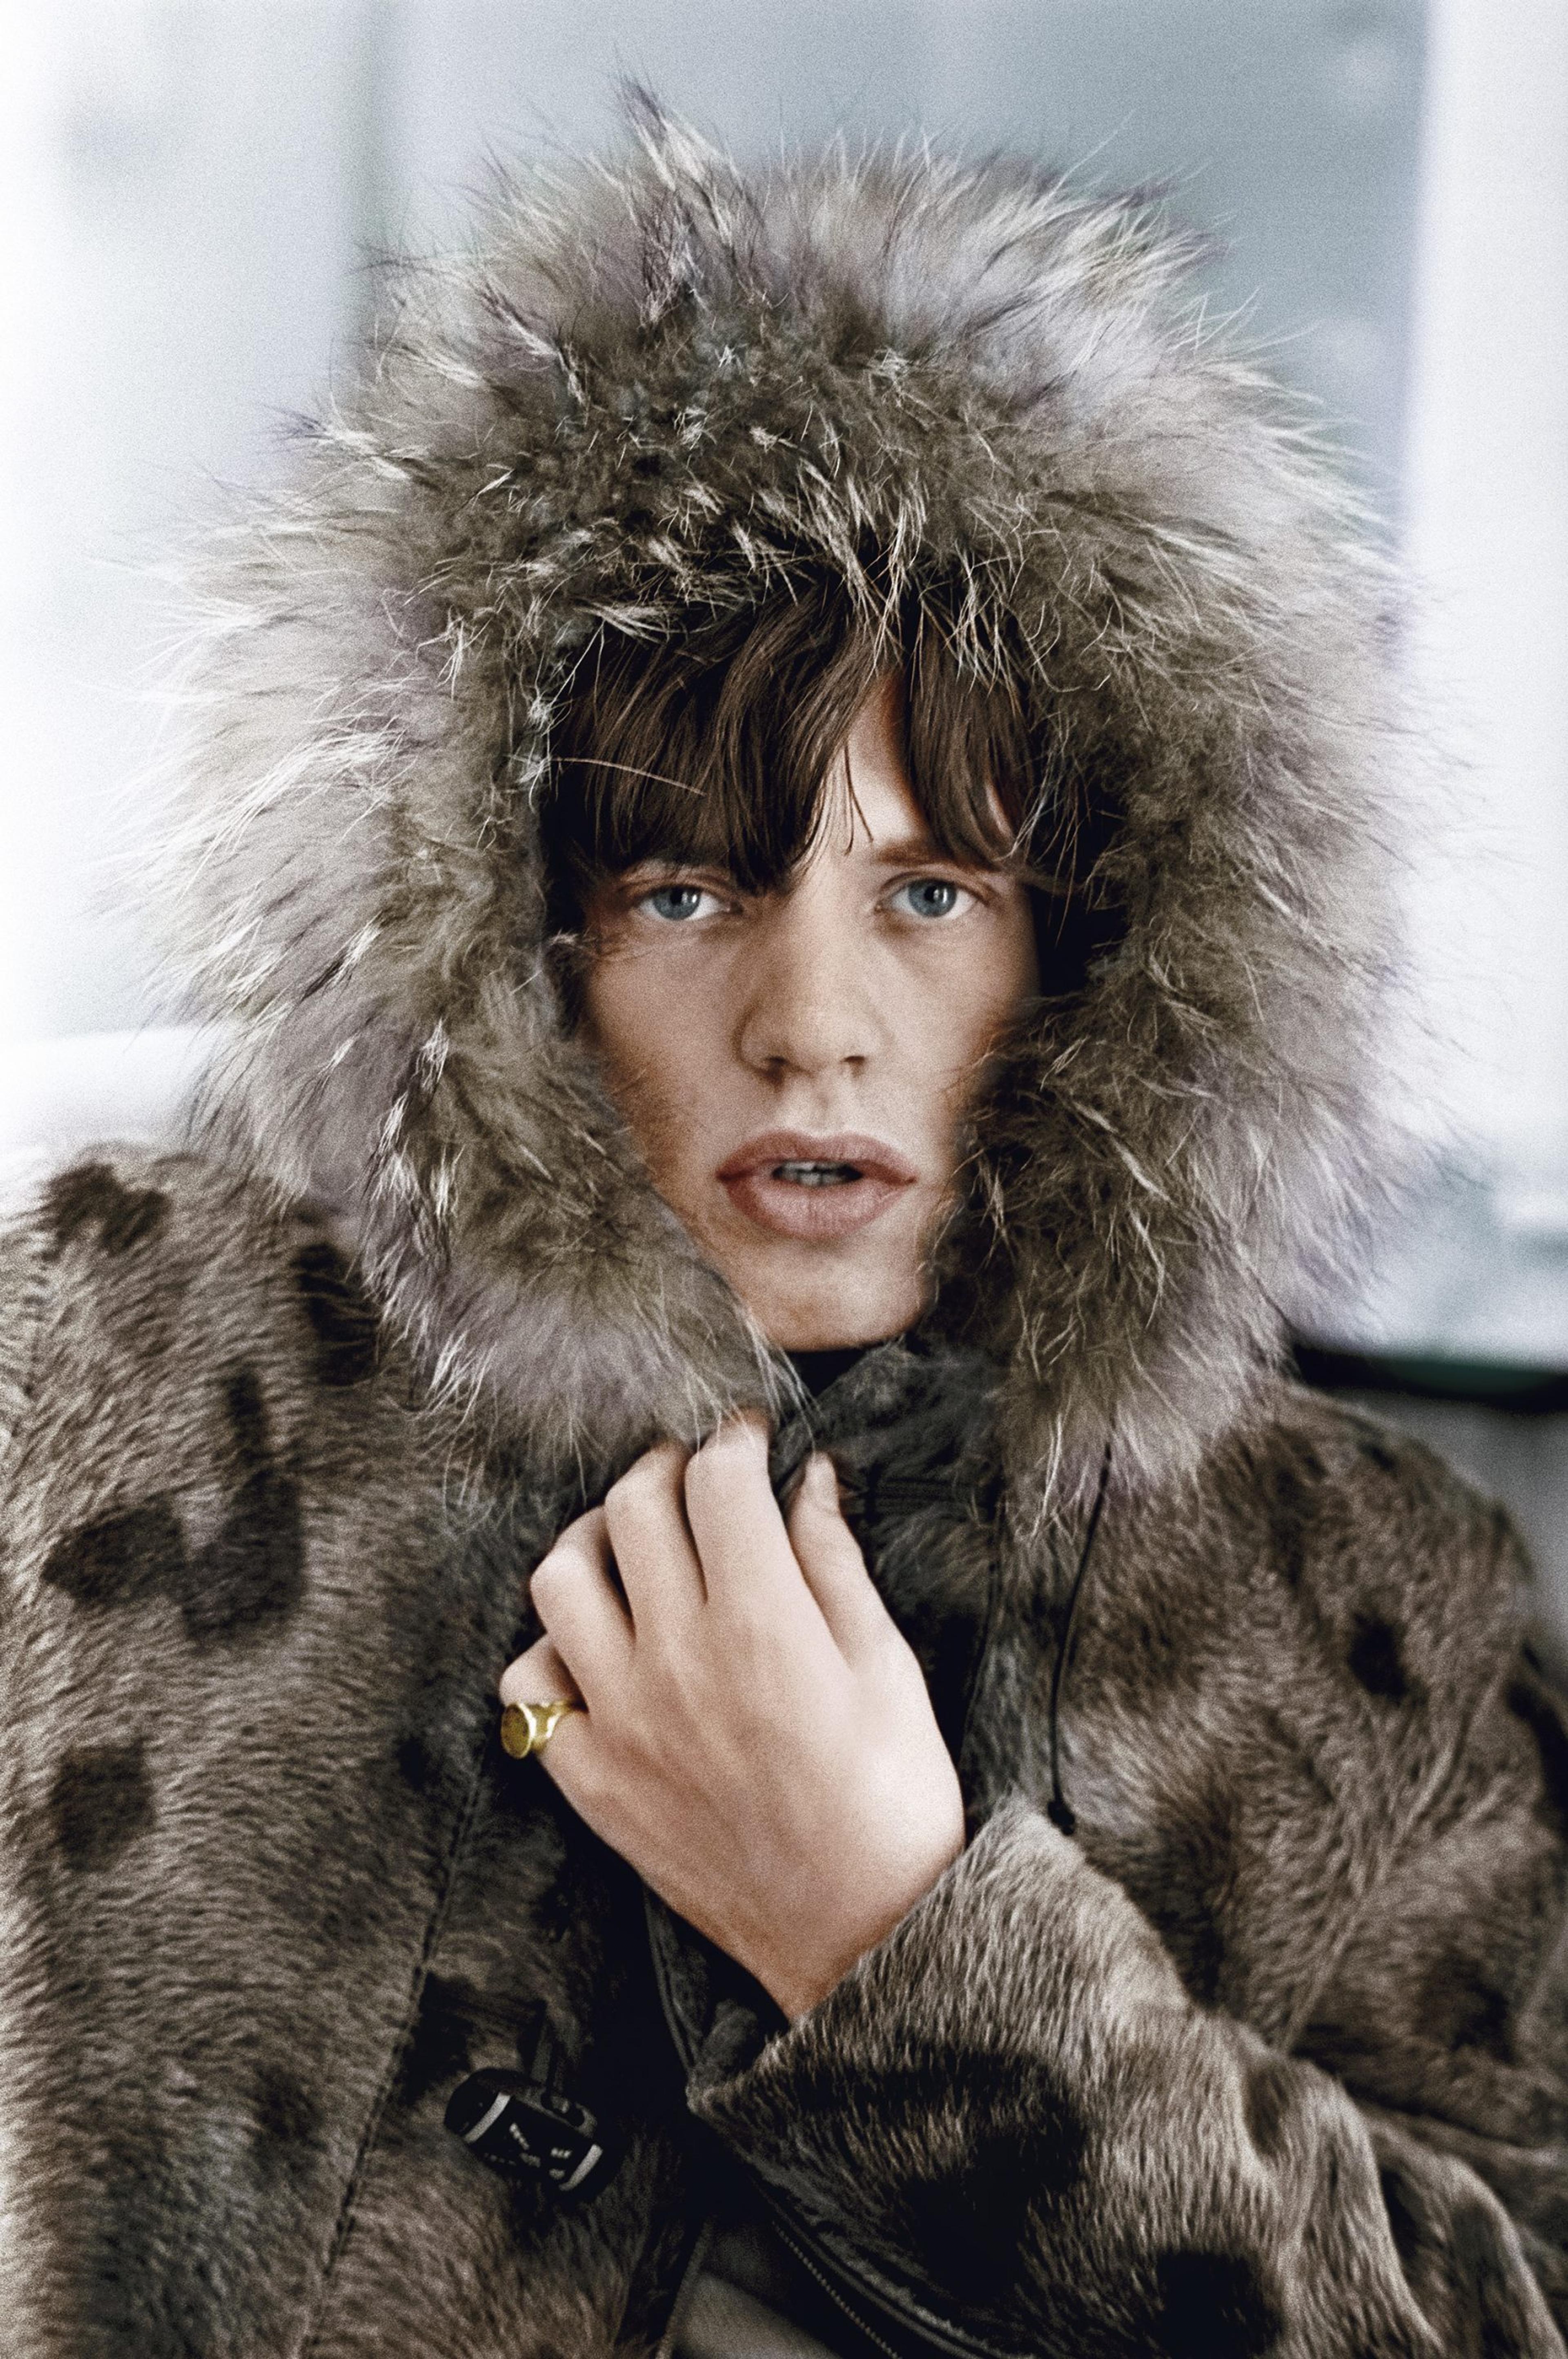 A portrait of Mick Jagger in a brown spotted fur coat wearing a gold pinky ring